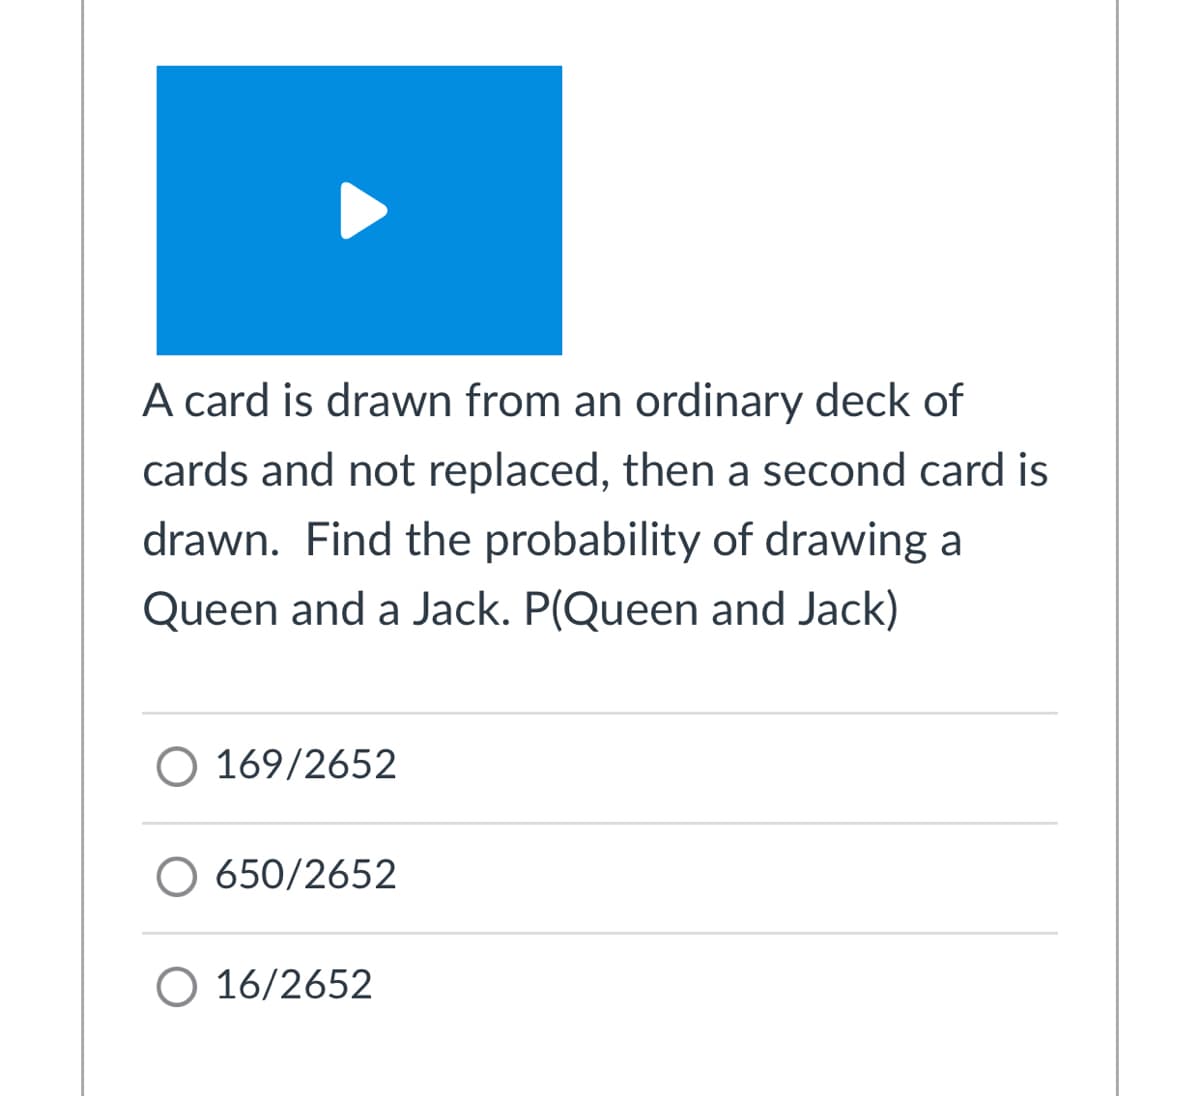 A card is drawn from an ordinary deck of
cards and not replaced, then a second card is
drawn. Find the probability of drawing a
Queen and a Jack. P(Queen and Jack)
O 169/2652
O 650/2652
O 16/2652
